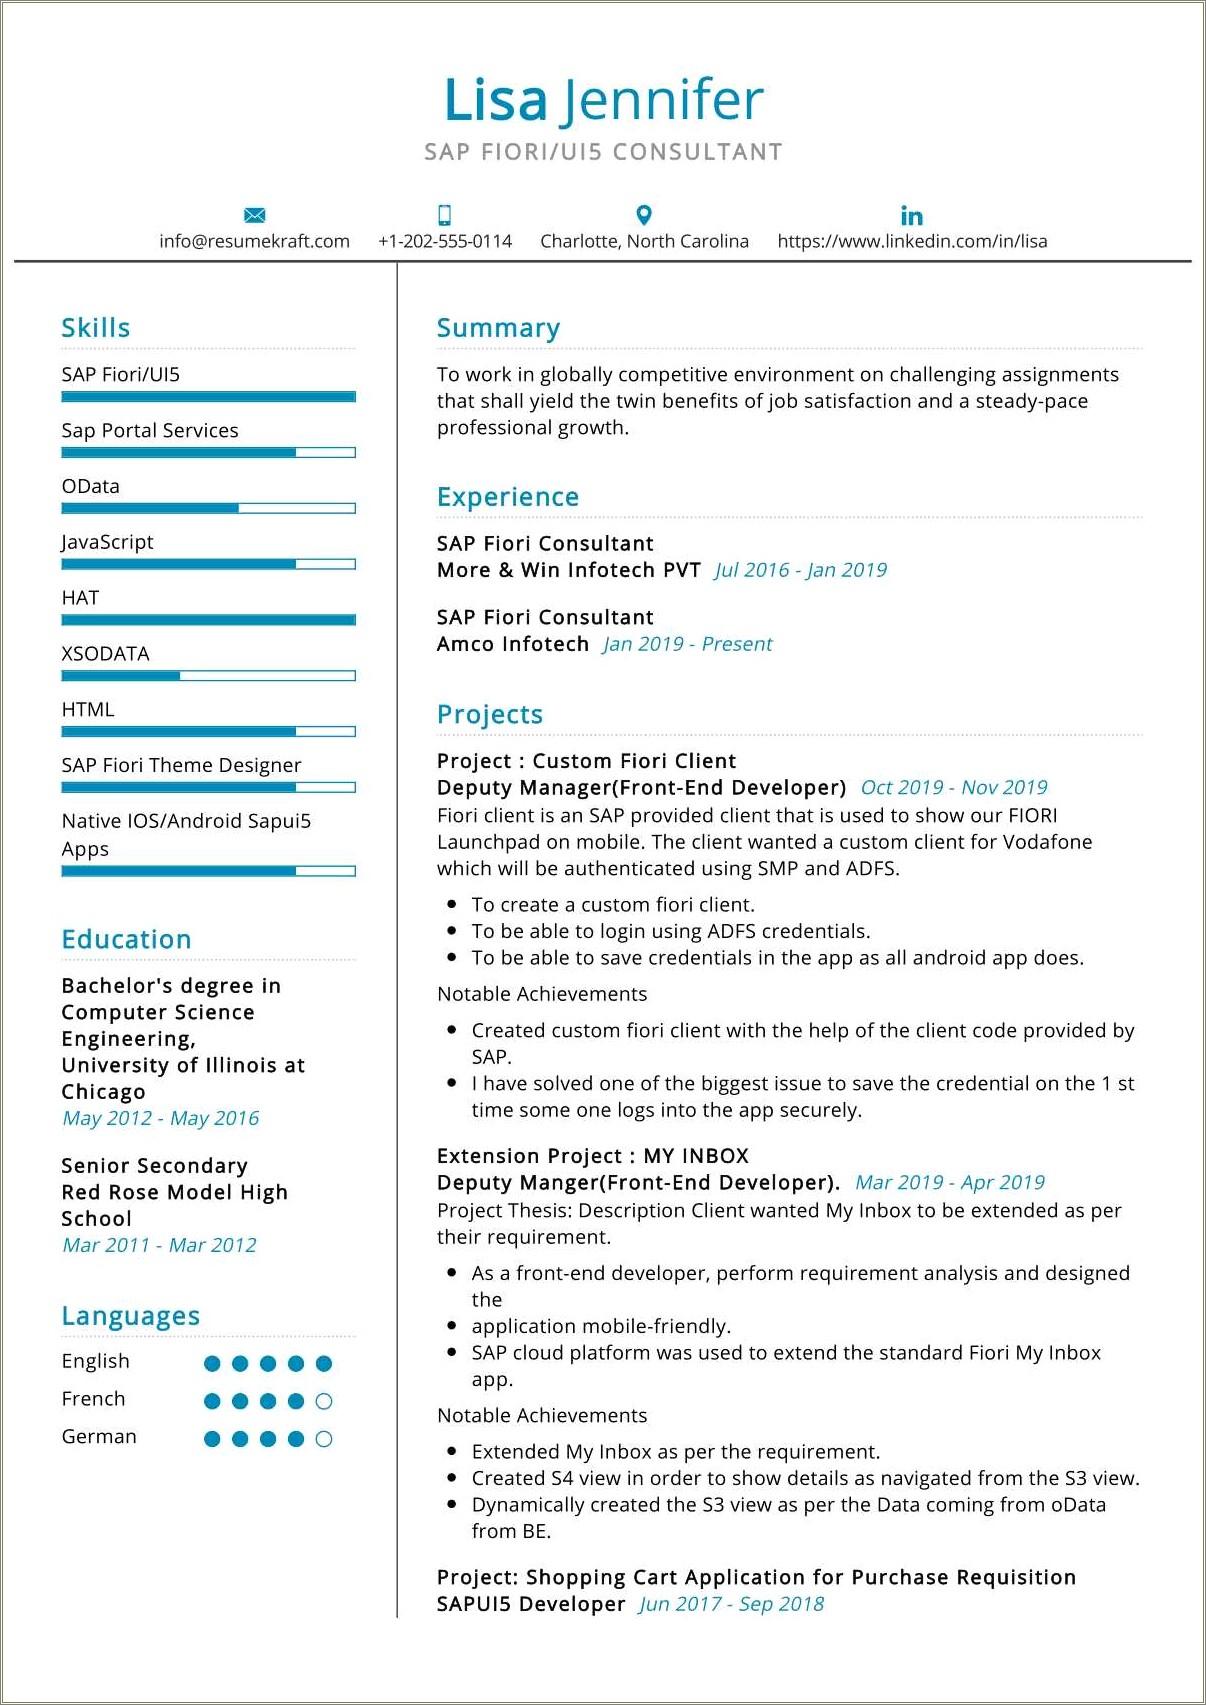 Sap Abap 3 Years Experience Resume Free Download